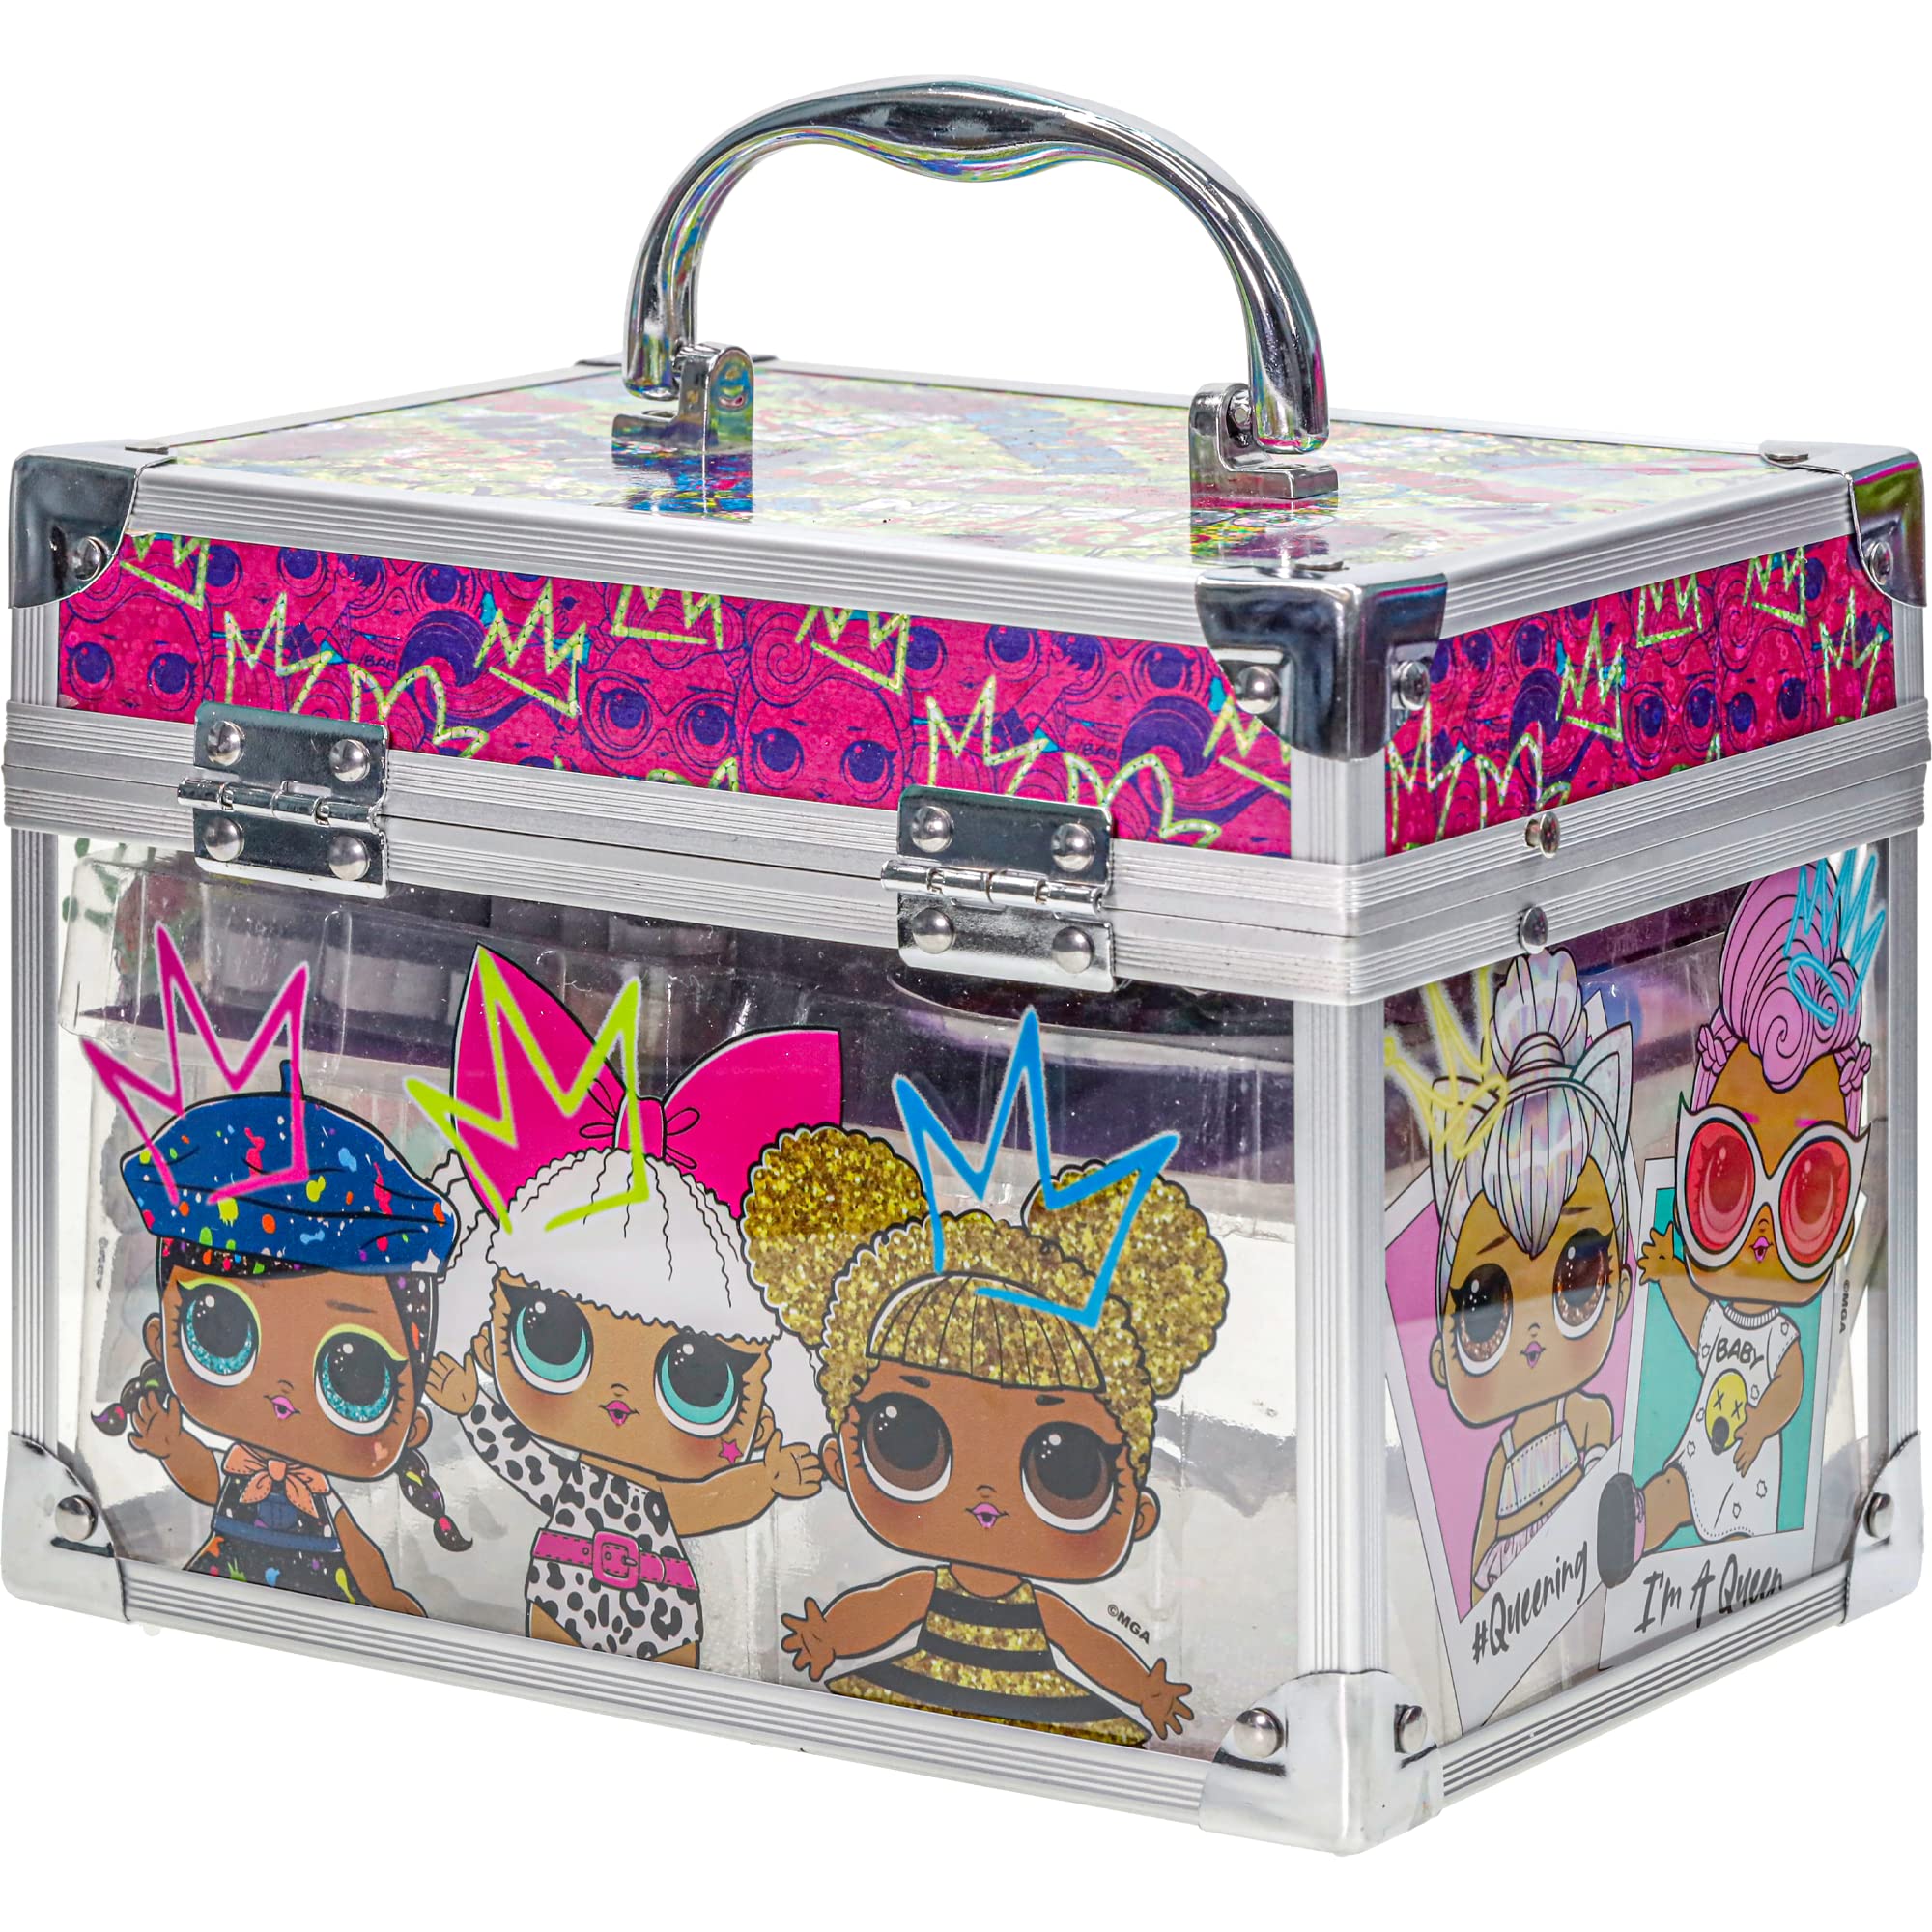 L.O.L Surprise! Townley Girl Kids' Makeup Set With Train Case for Ages 3+